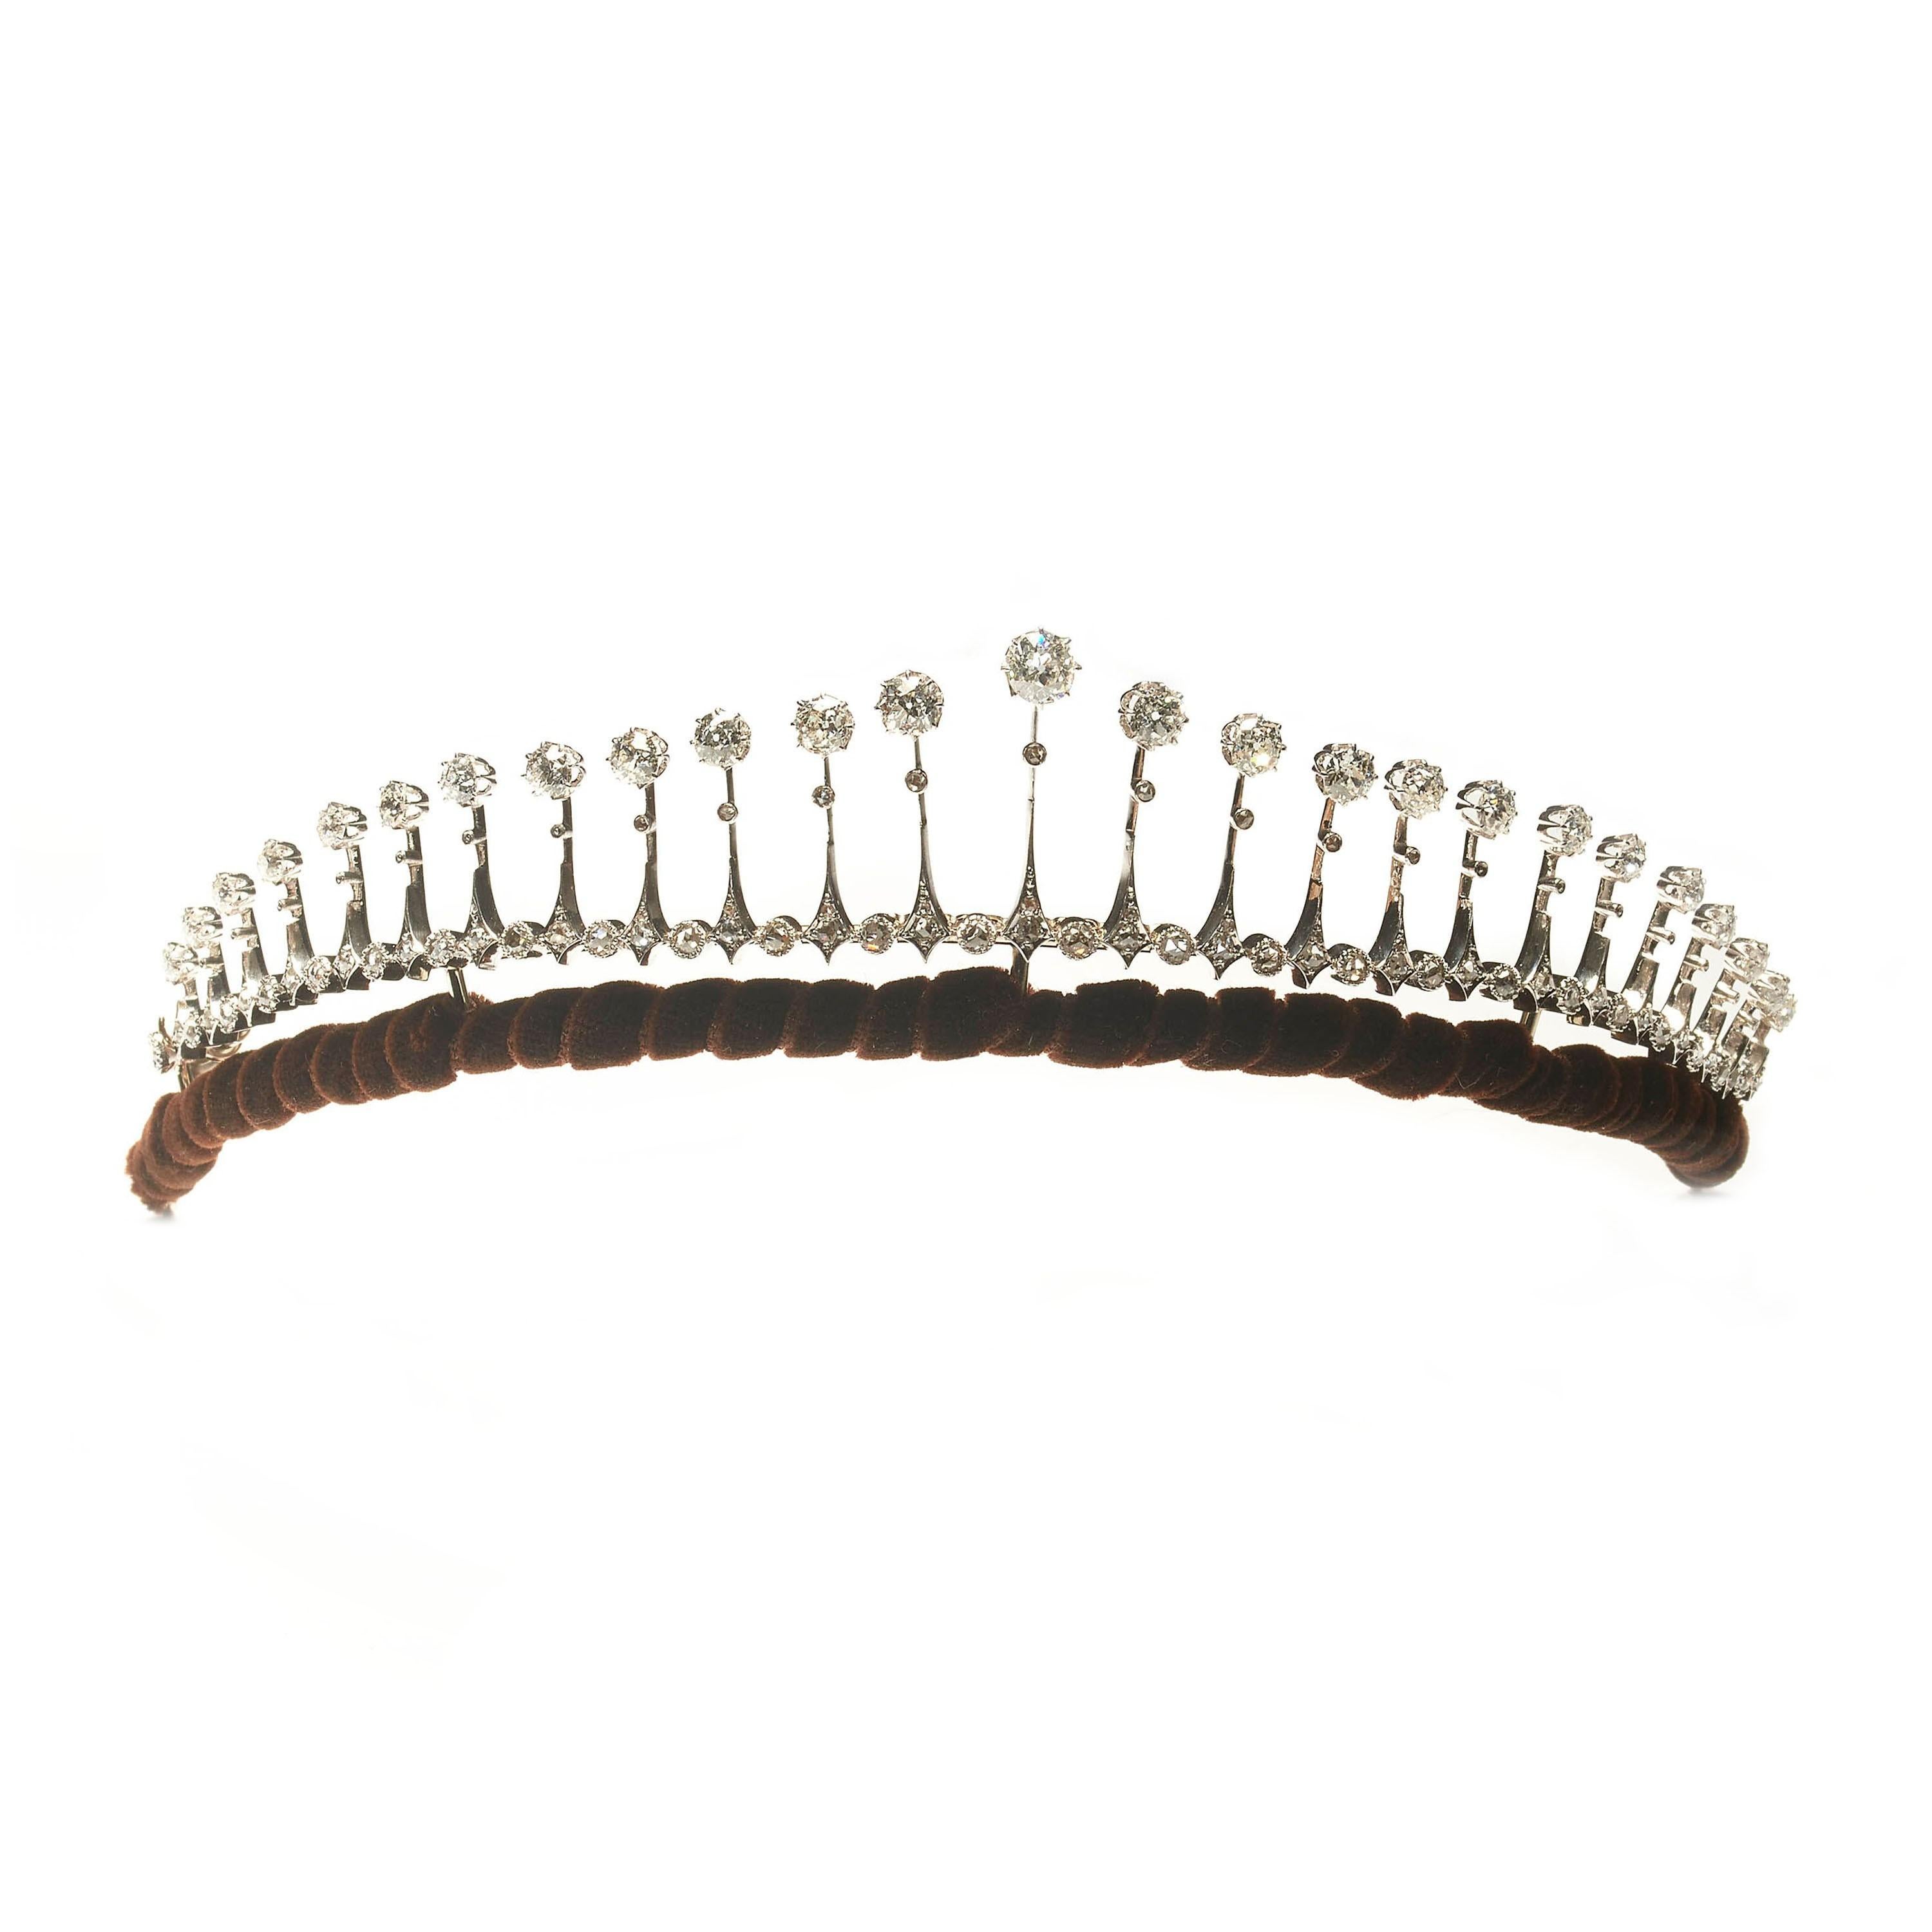 An antique, French, diamond fringe tiara necklace, with rose-cut diamonds in rub over settings, alternating with graduating old-cut diamond drops, with an estimated total diamond weight of 12.00ct, the back piece detaches to wear as a separate